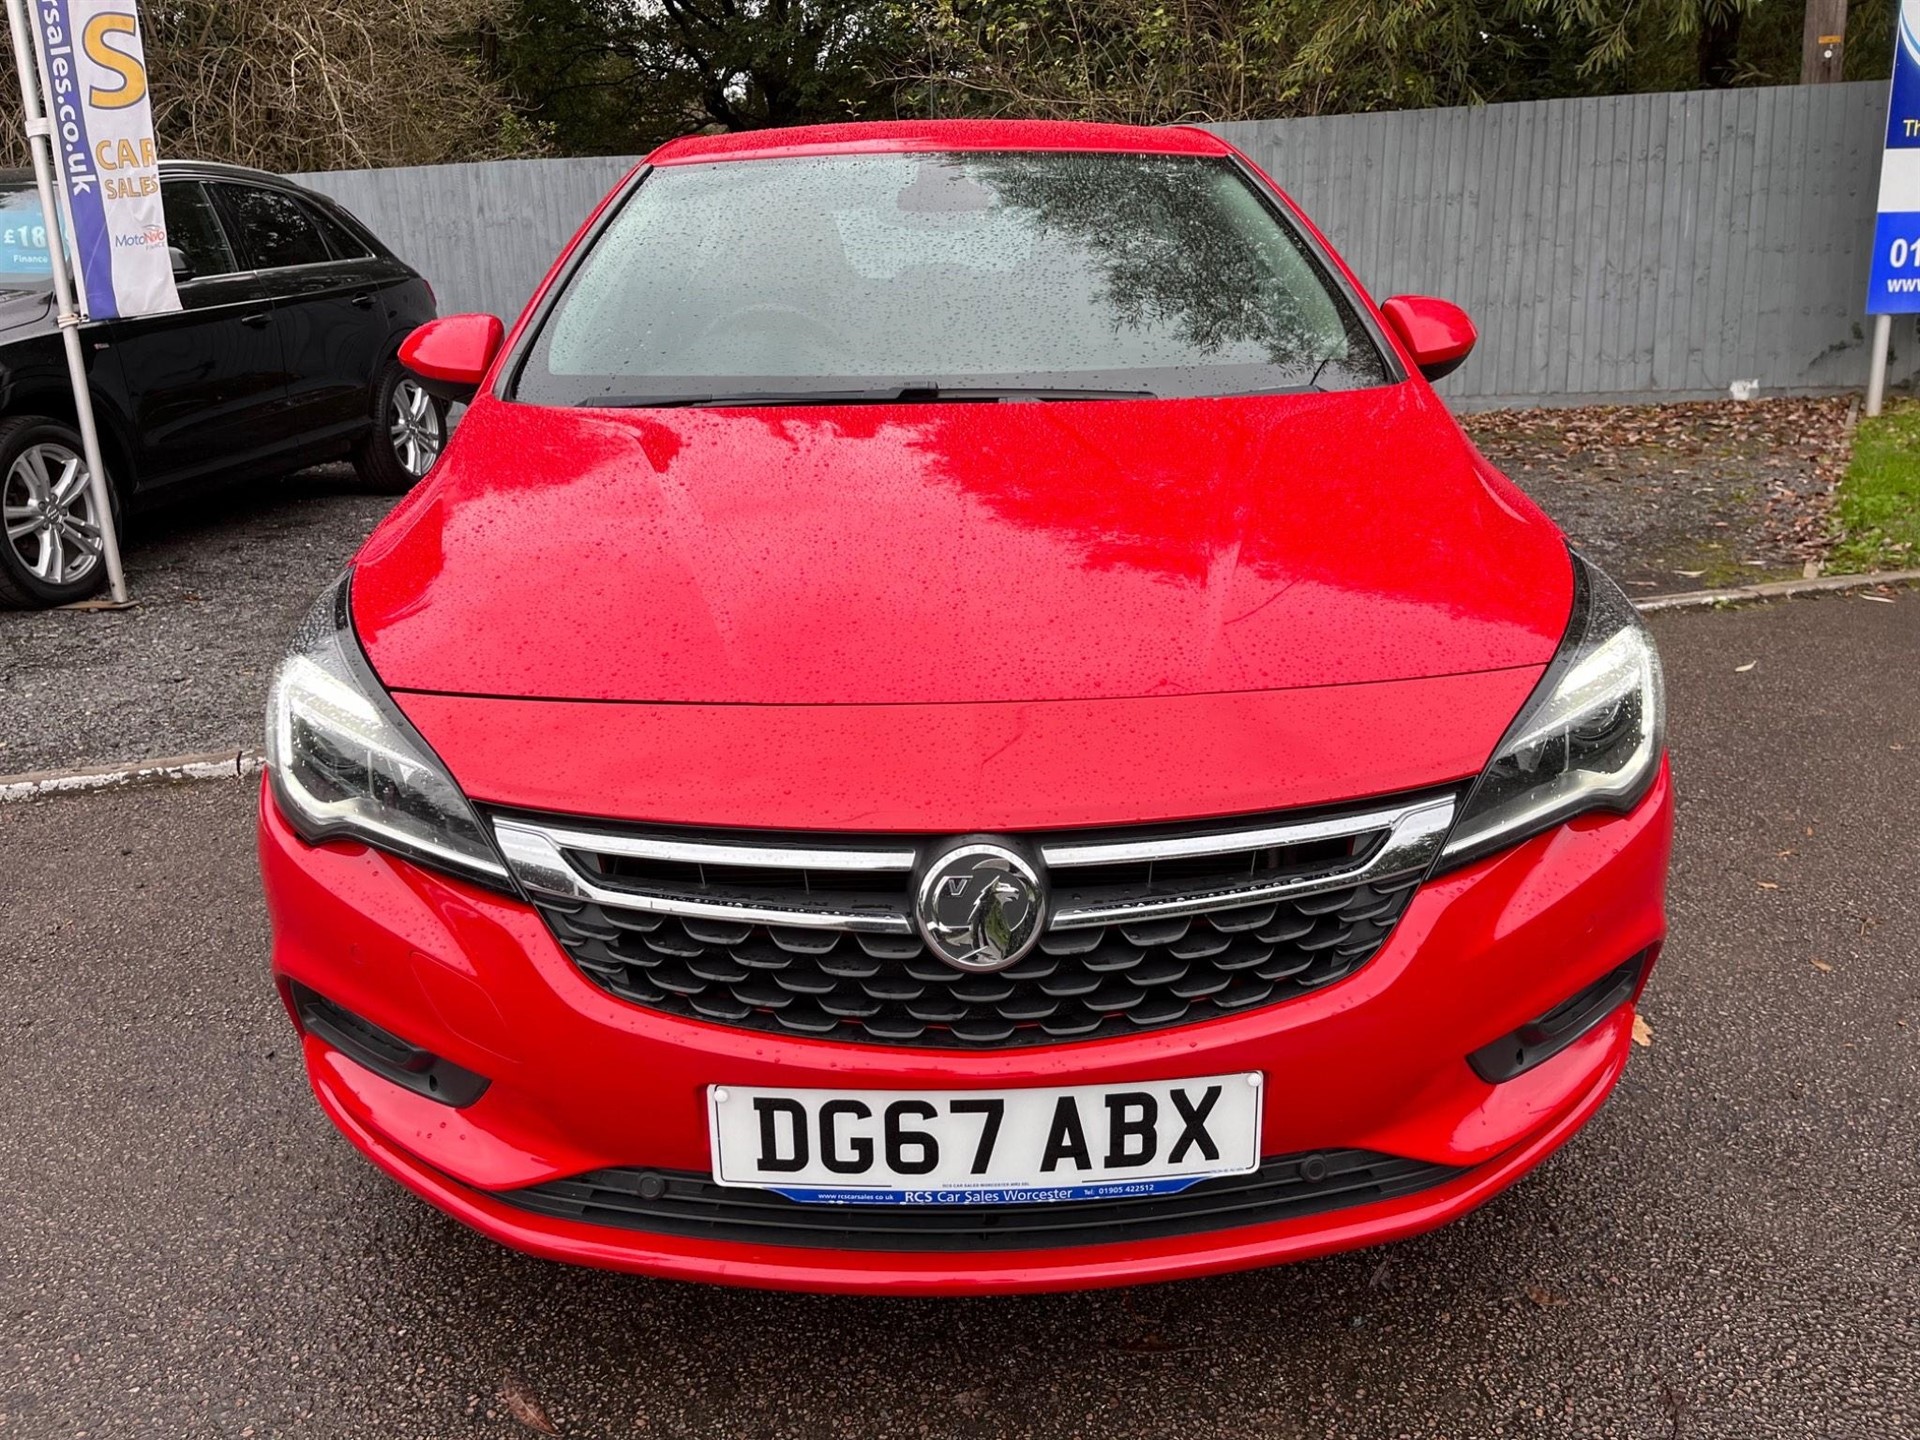 Used Vauxhall Astra for sale in Worcester, Worcestershire